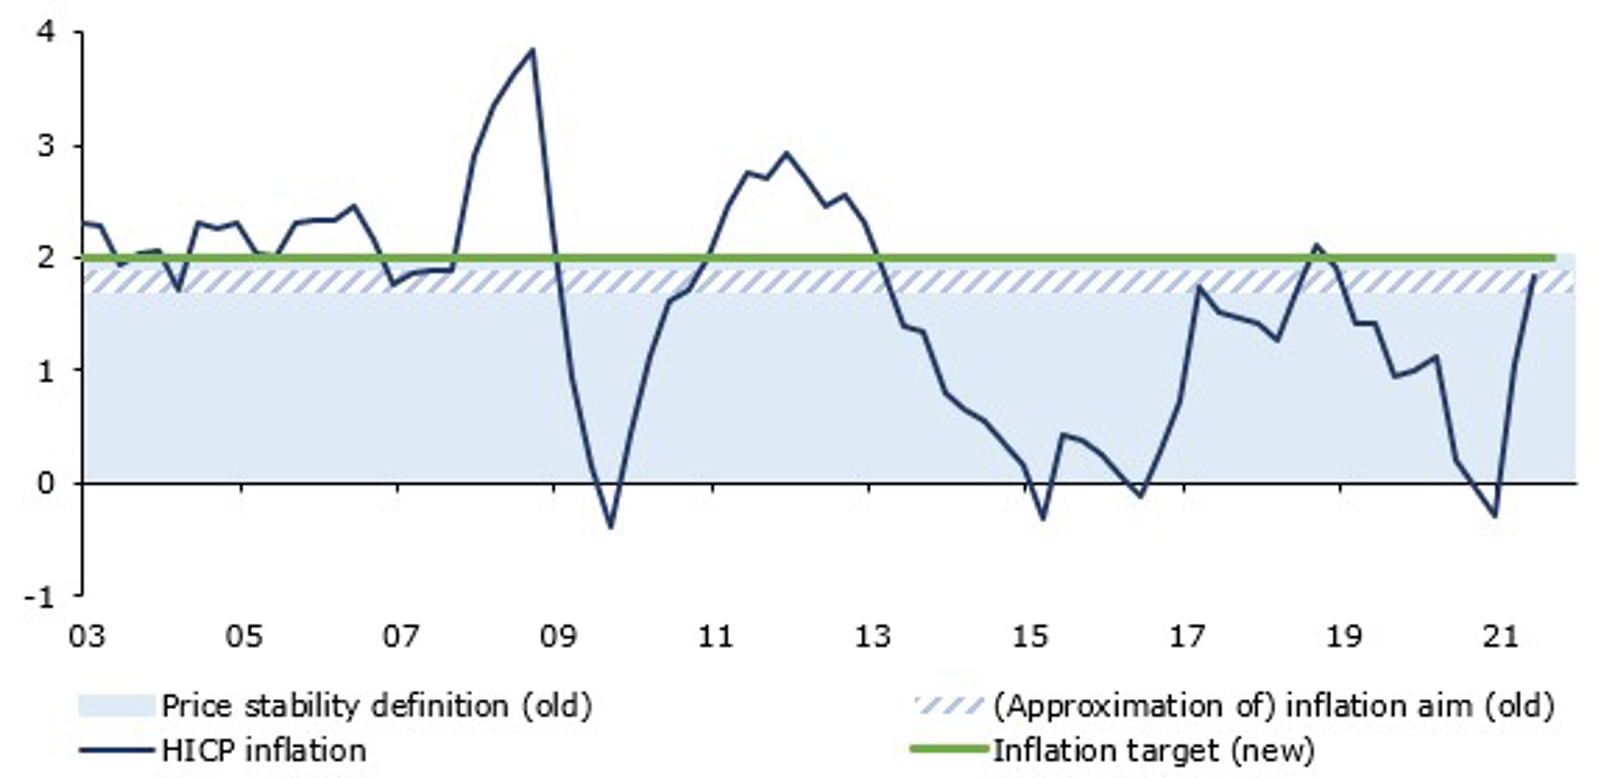 Figure 1: The inflation target under the ECB’s prior and current monetary policy strategy